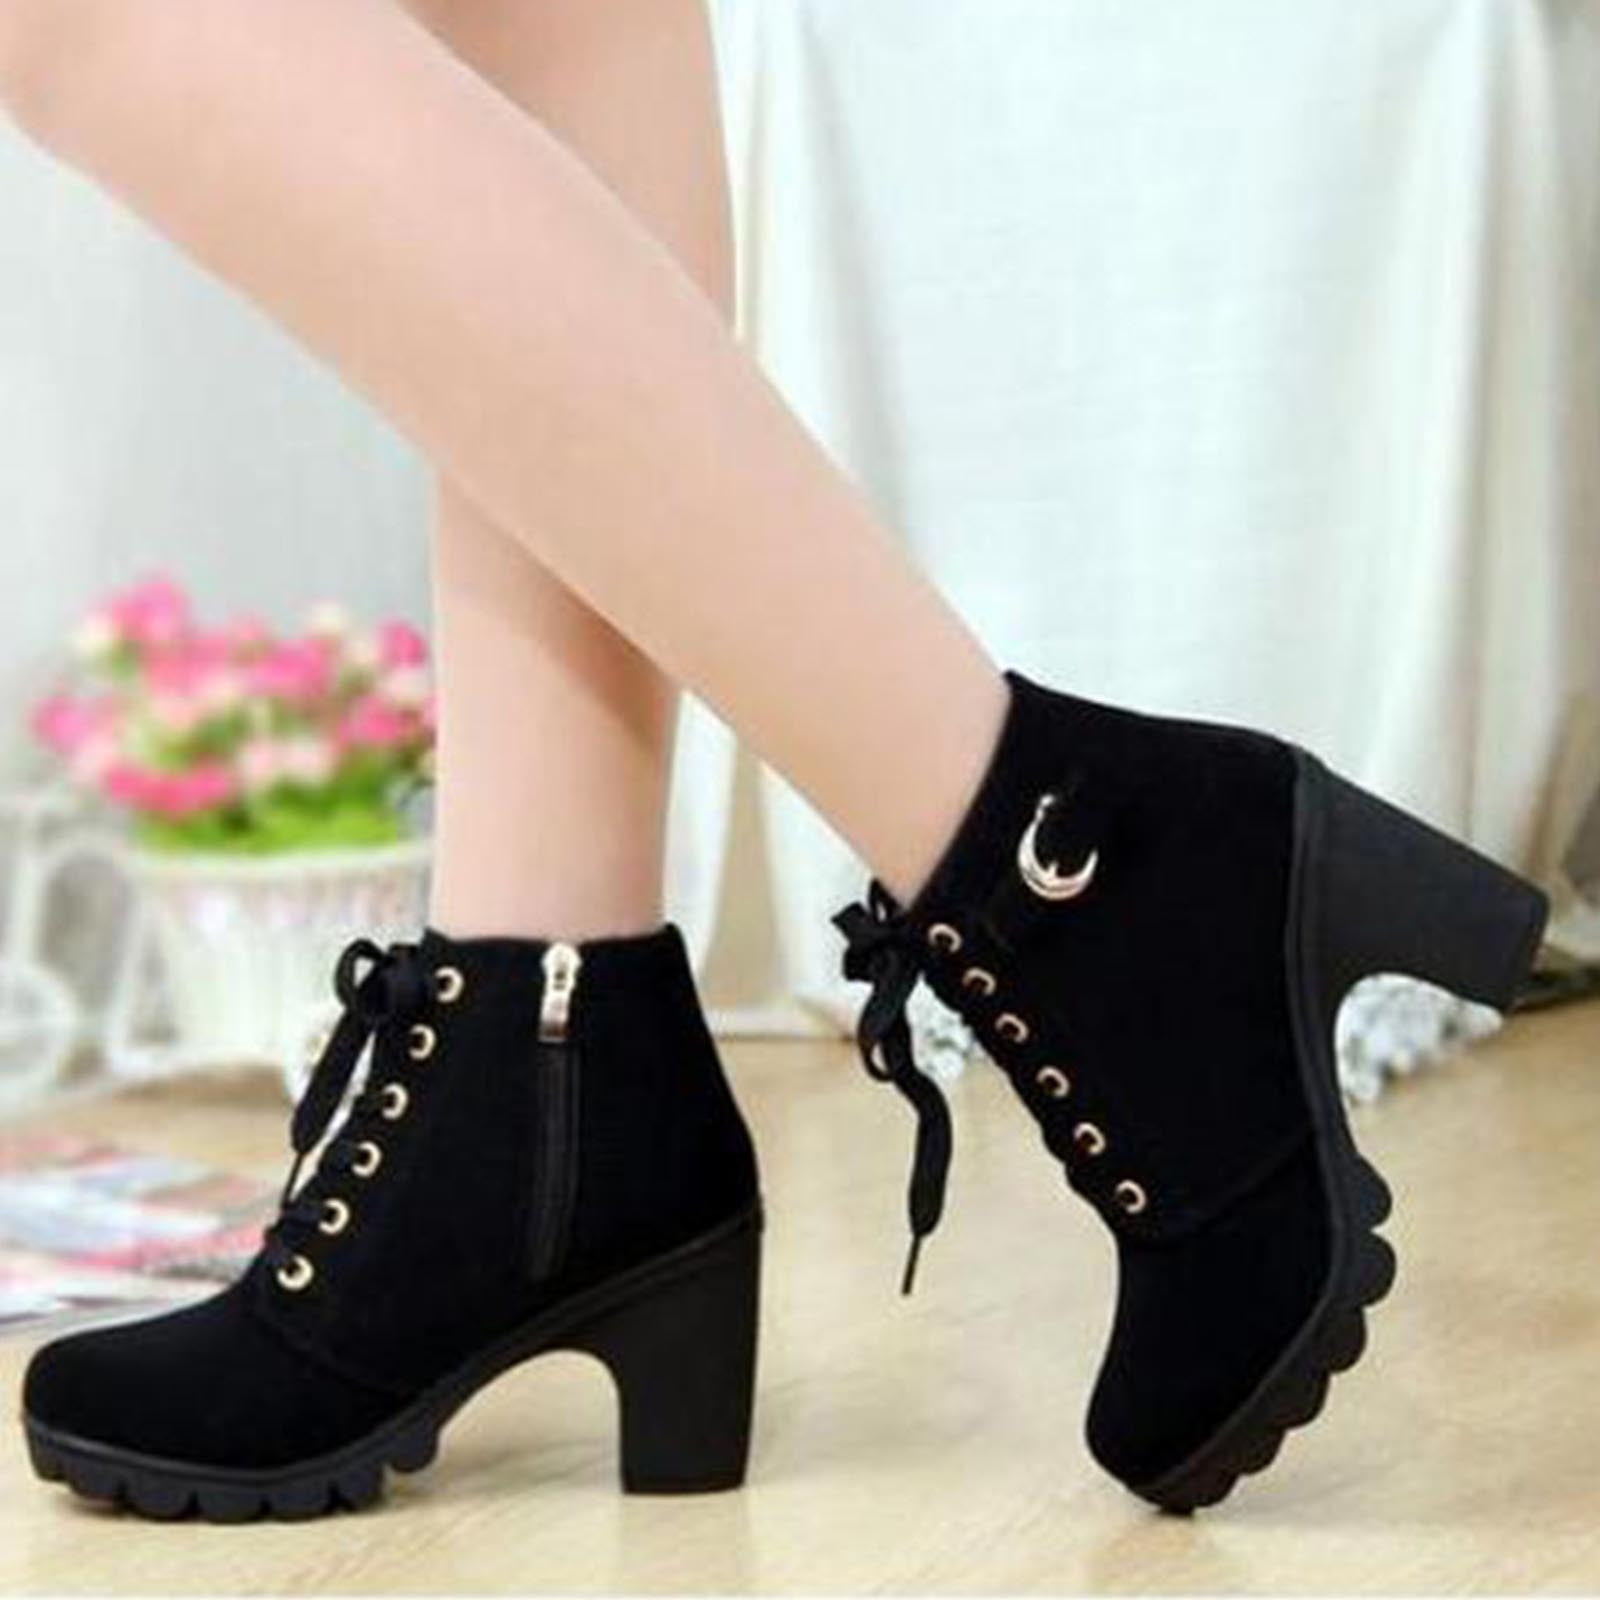 Buy RSVP by Nykaa Fashion Black Knee Length Block Heel Boots Online